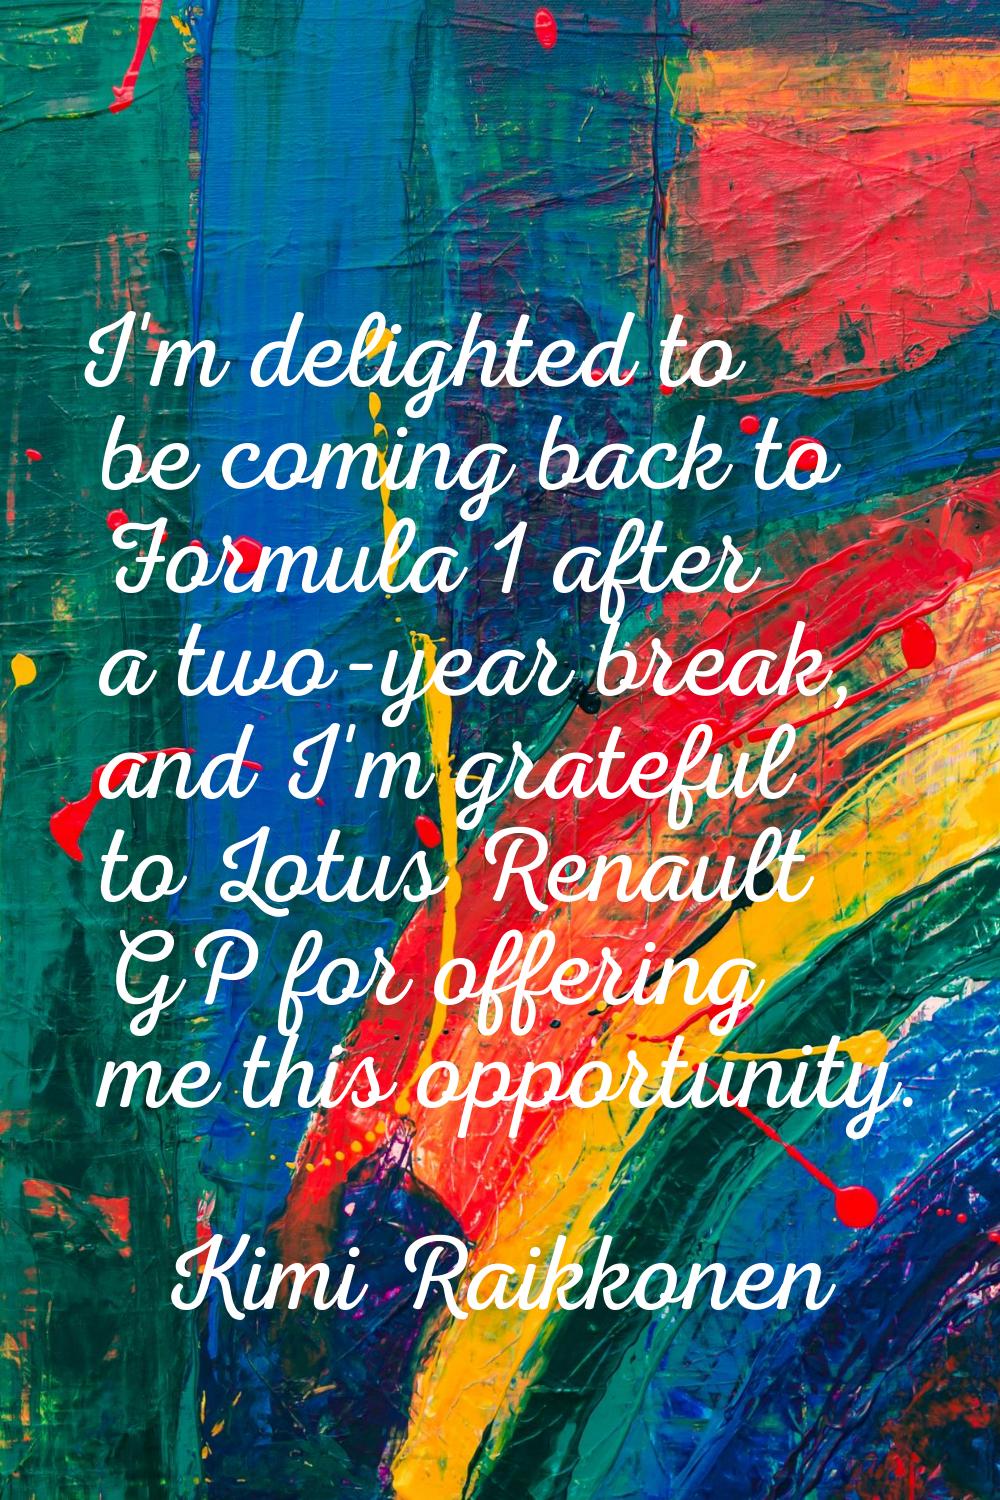 I'm delighted to be coming back to Formula 1 after a two-year break, and I'm grateful to Lotus Rena